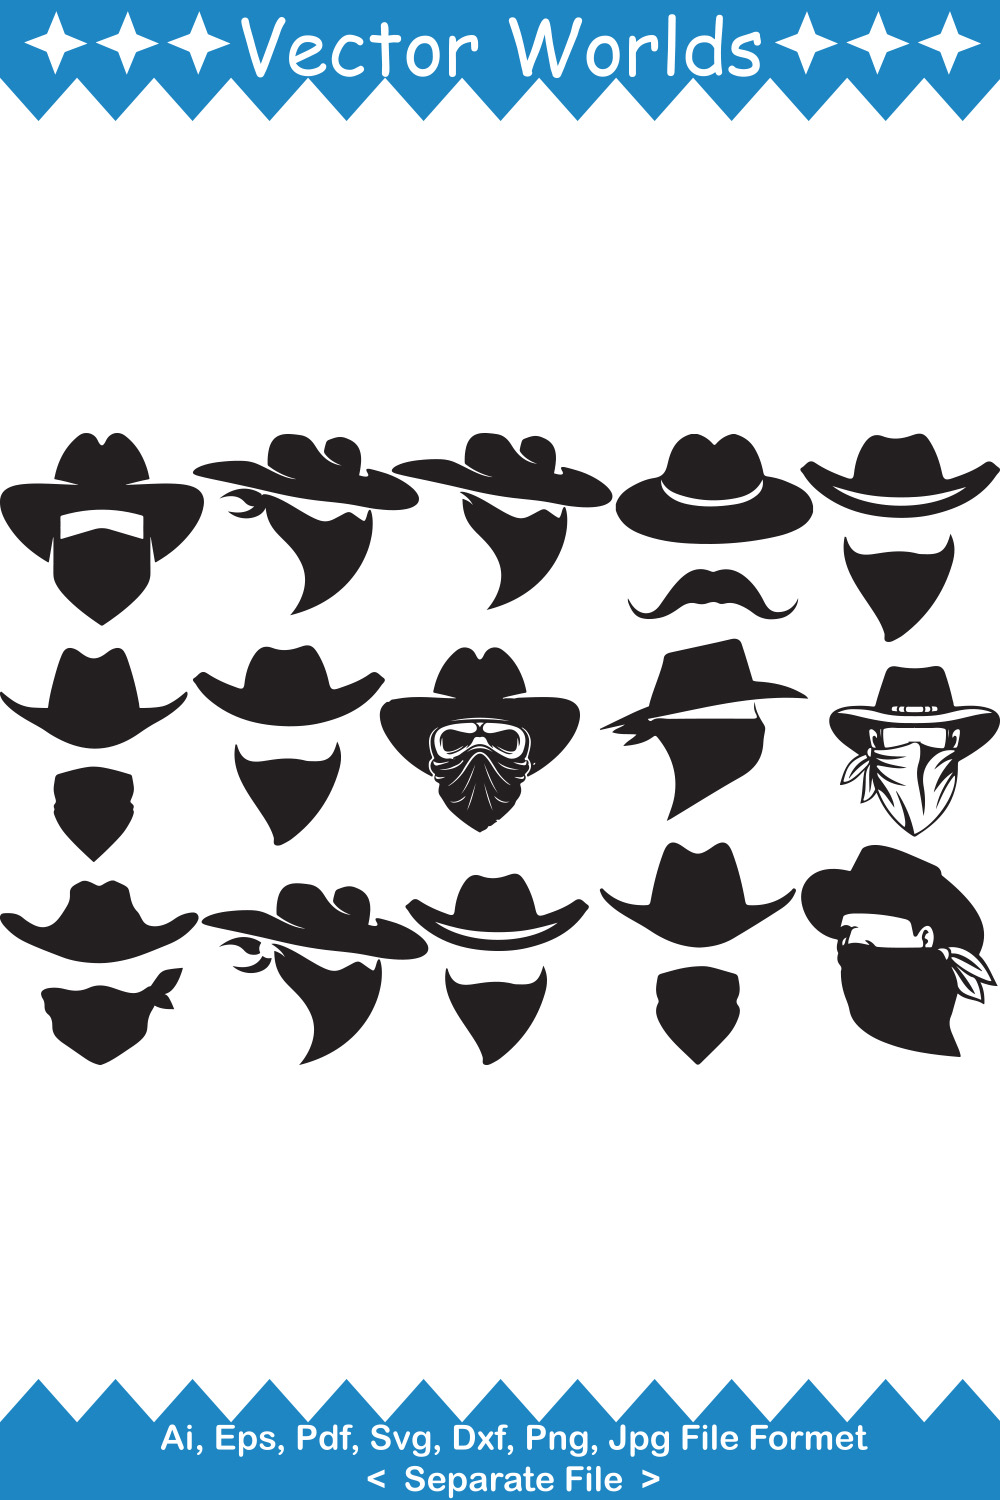 Collection of enchanting vector image of silhouettes of cowboys bandits